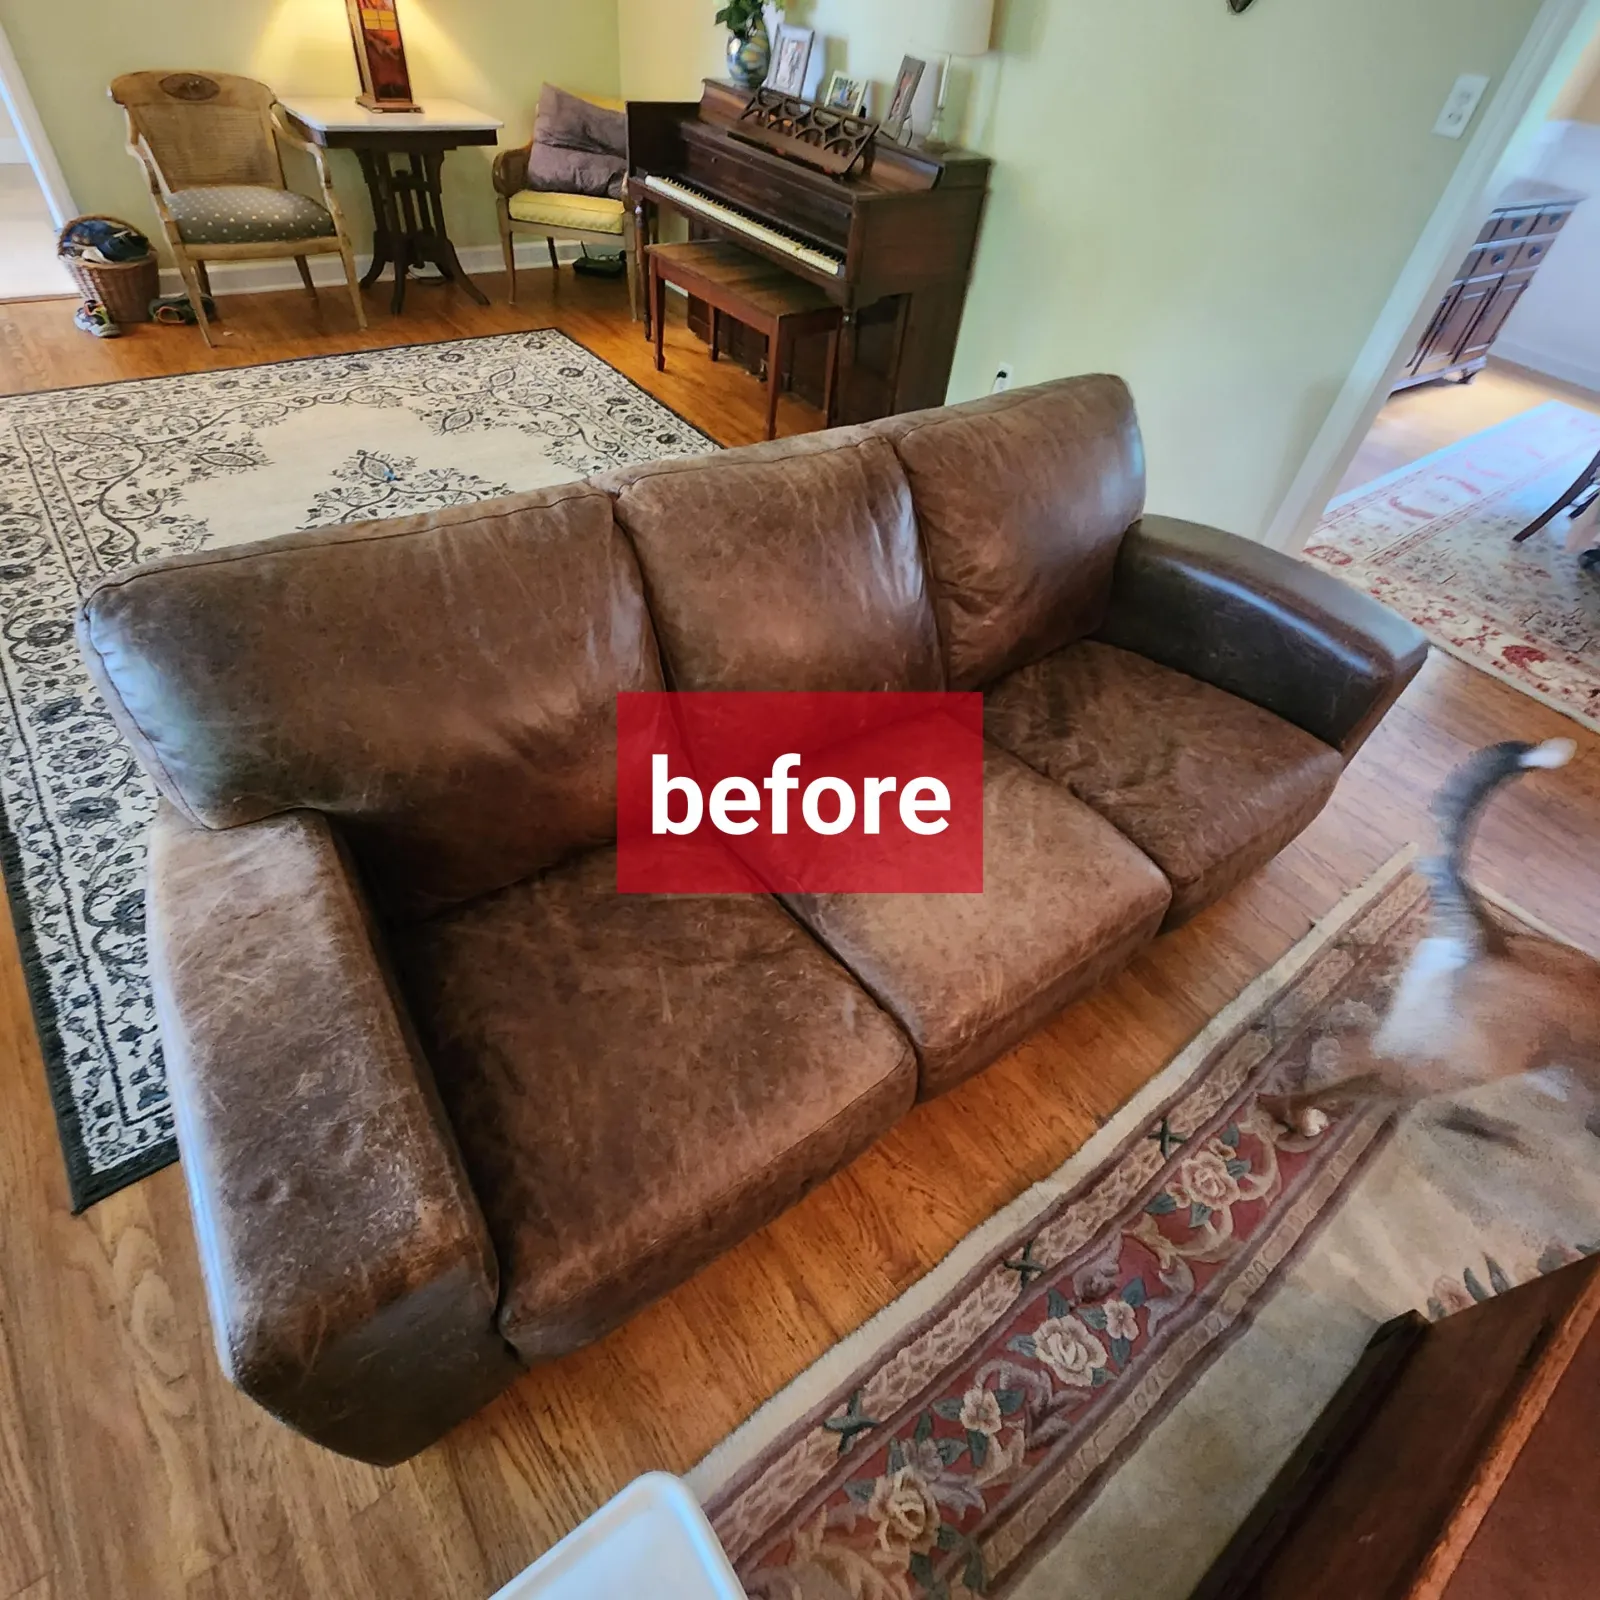 a worn leather couch before professional leather couch cleaning services from Zerorez, in a real customer's home